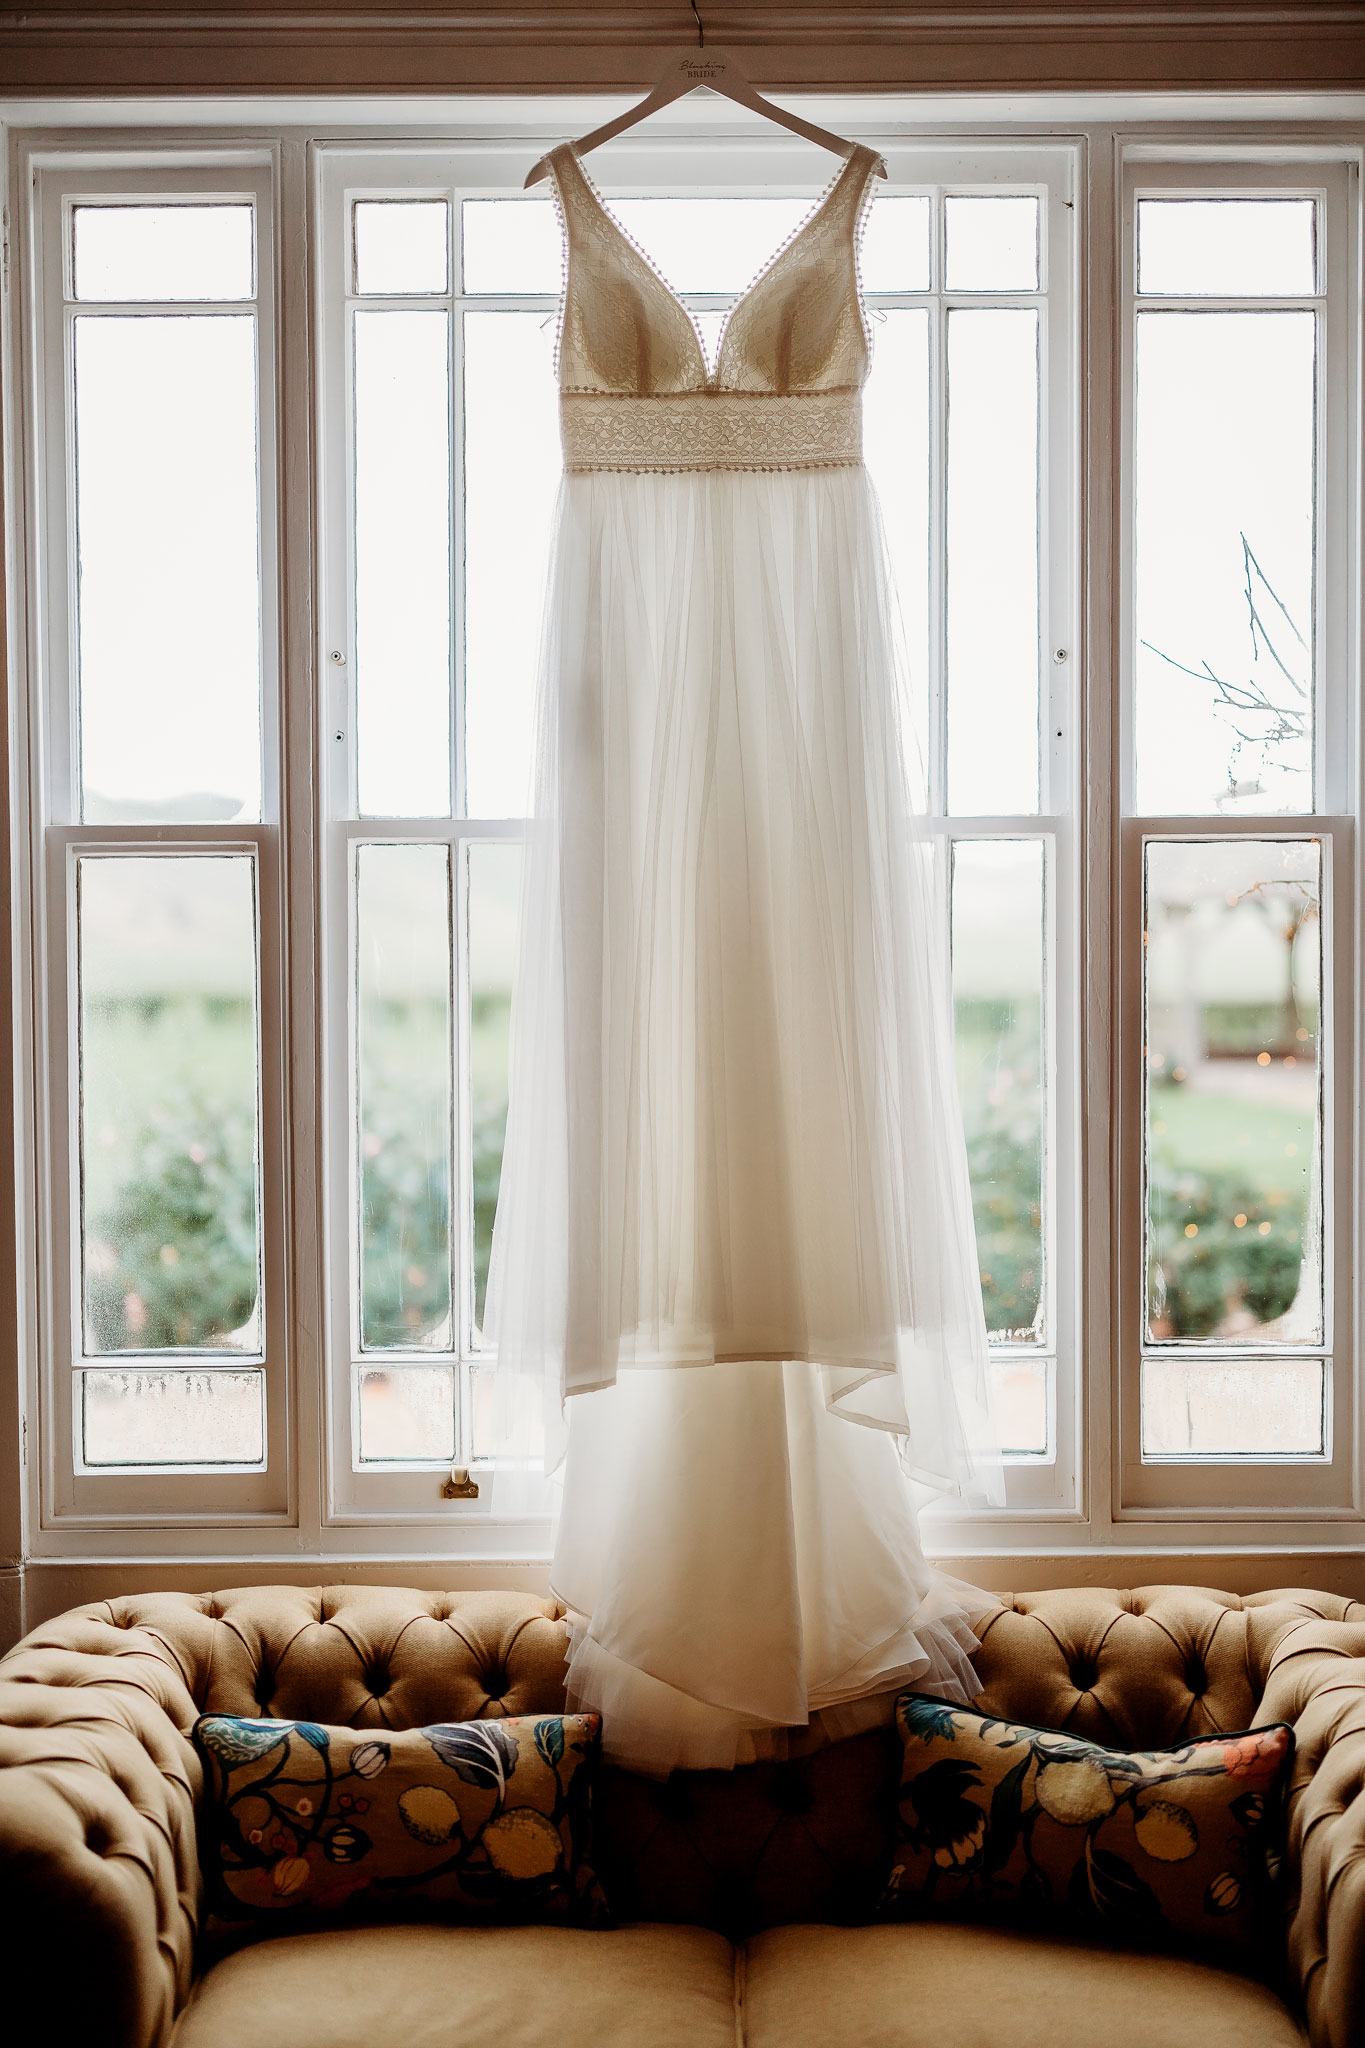 the wedding dress hung up by the victorian windows